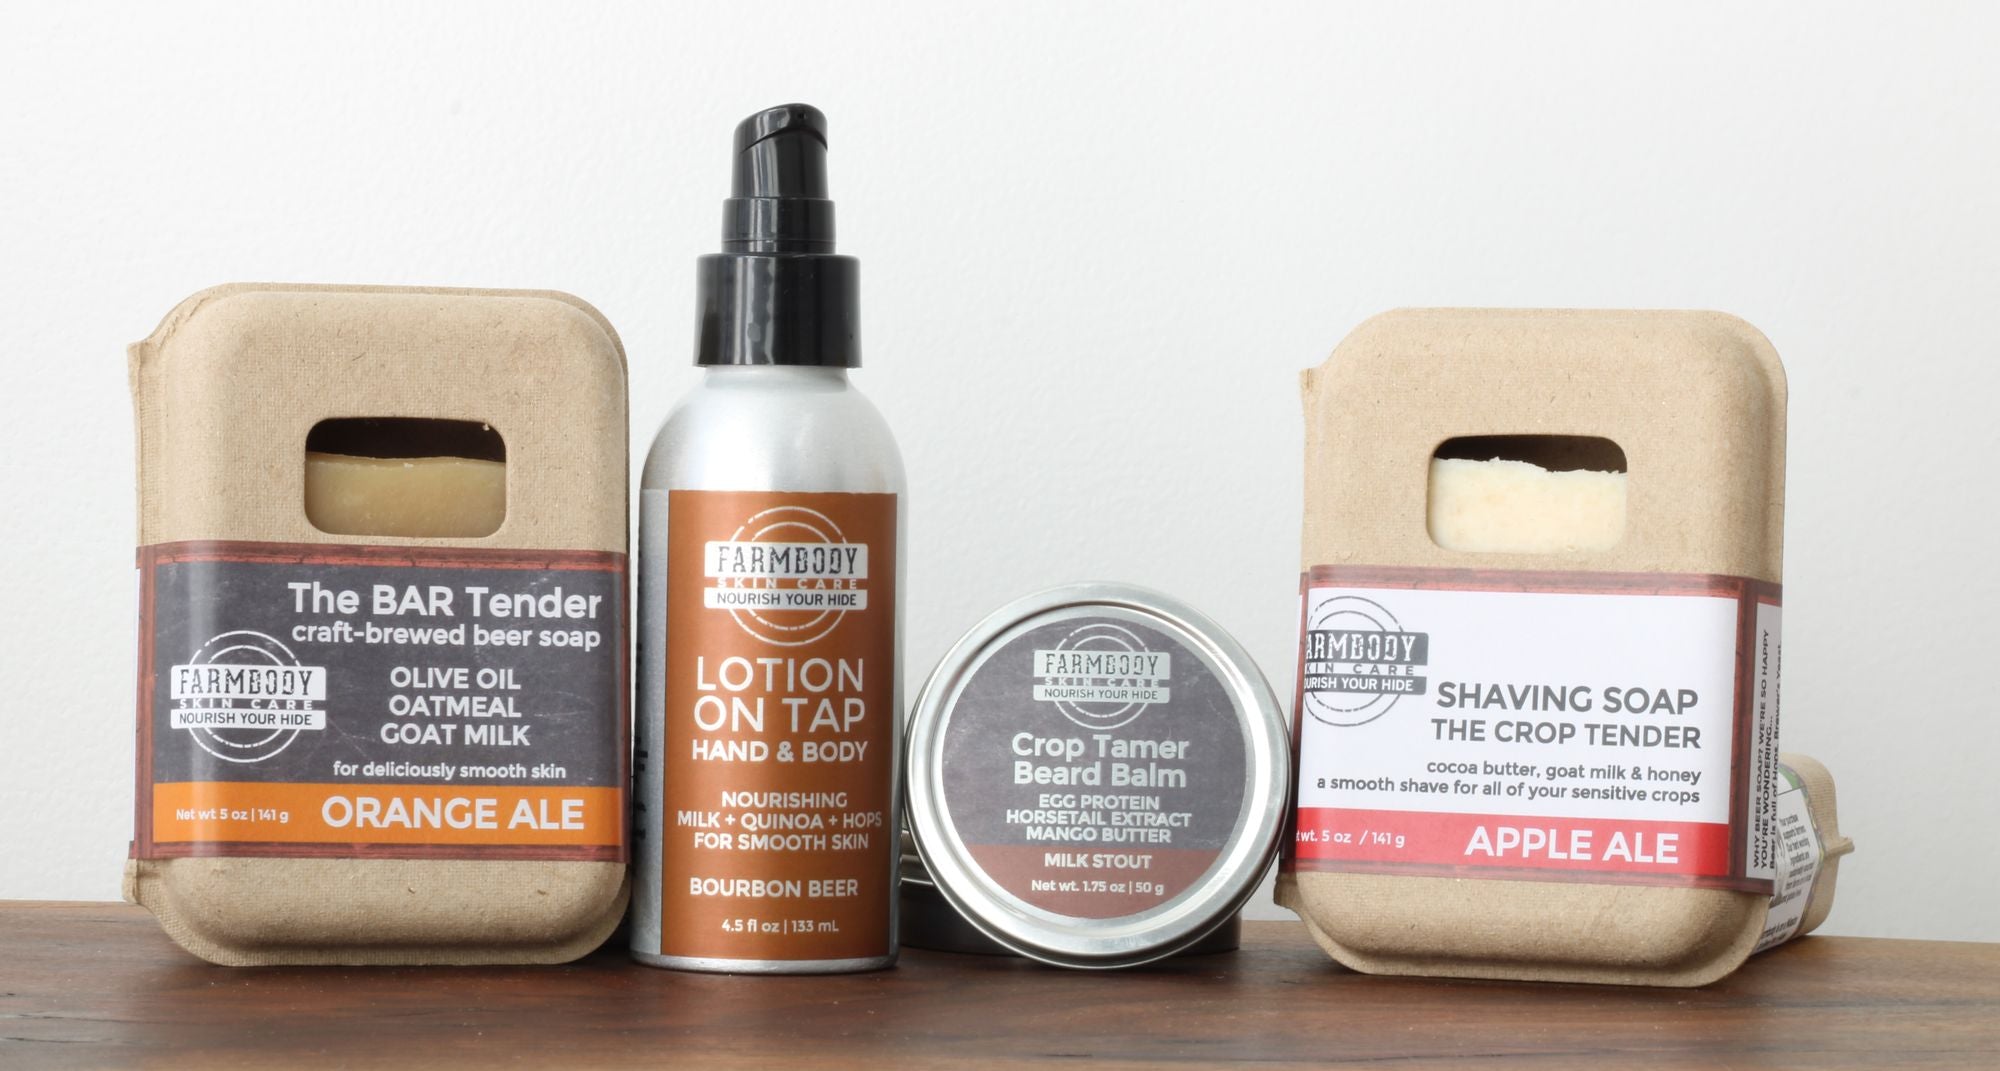 Farmbody Craft Brewed Beer Skin and Hair Care collection brewed with local craft beer soaps lotions beard balm shaving soap and more